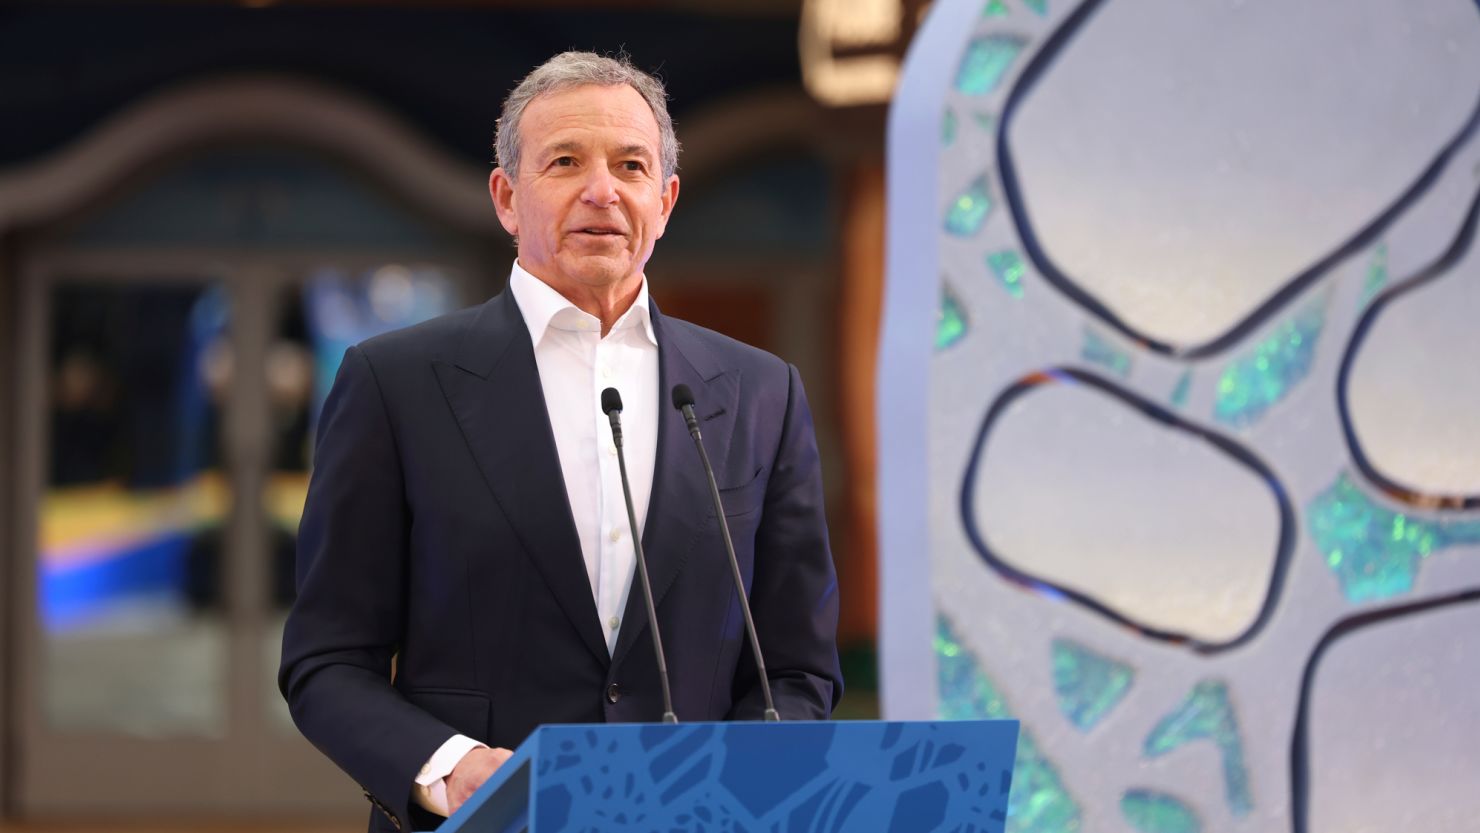 SHANGHAI, CHINA - DECEMBER 19: Bob Iger, CEO of The Walt Disney Company, speaks during the grand opening ceremony of Shanghai Disney Resort's Zootopia-themed attraction at Shanghai Disney Resort on December 19, 2023 in Shanghai, China. The Zootopia land in Shanghai Disney Resort is expected to open to the public from December 20. (Photo by VCG/VCG via AP )